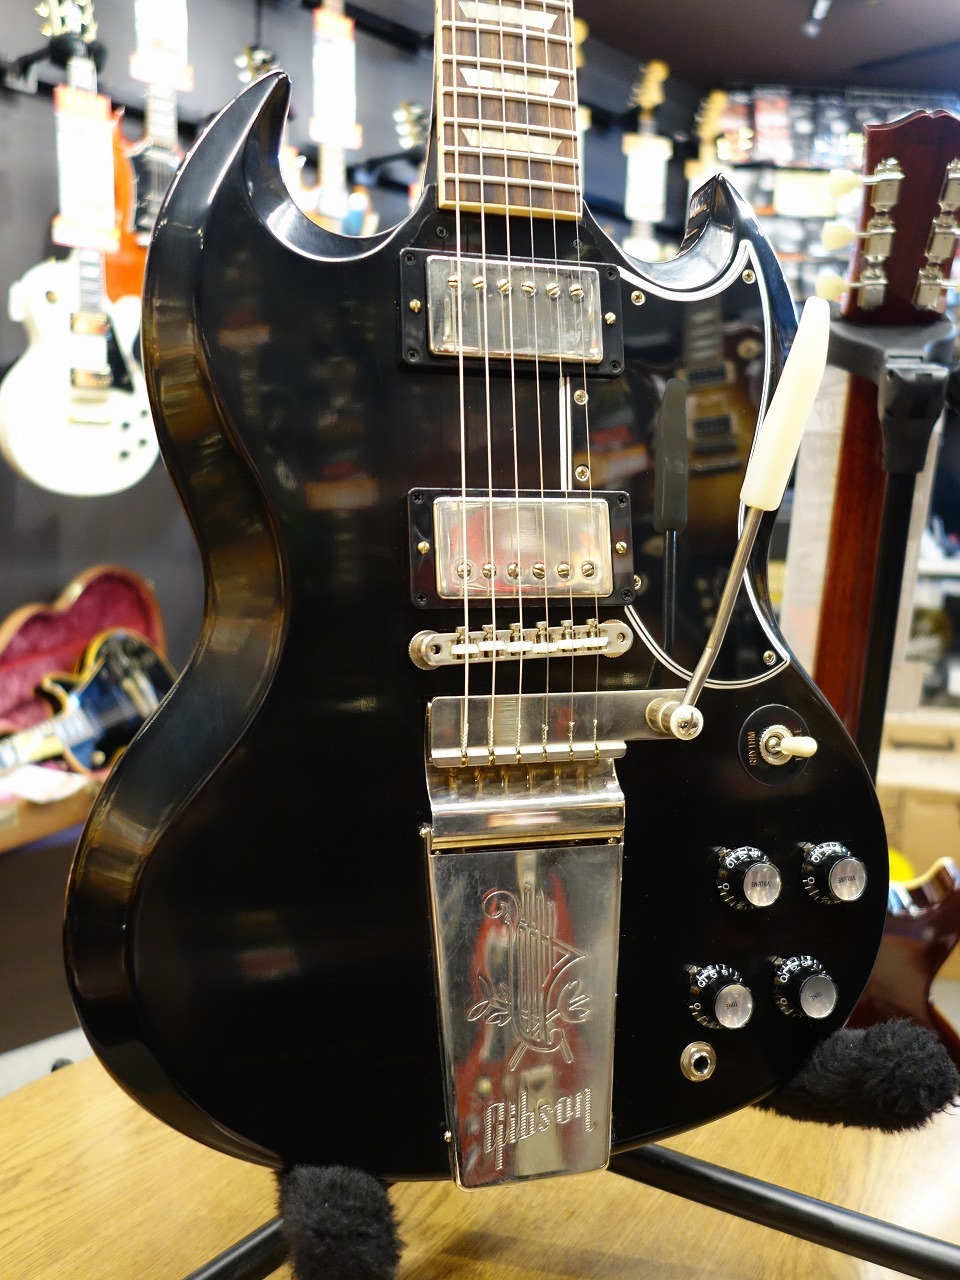 【Maestro by Gibson】SG Black マエストロ  ギブソン